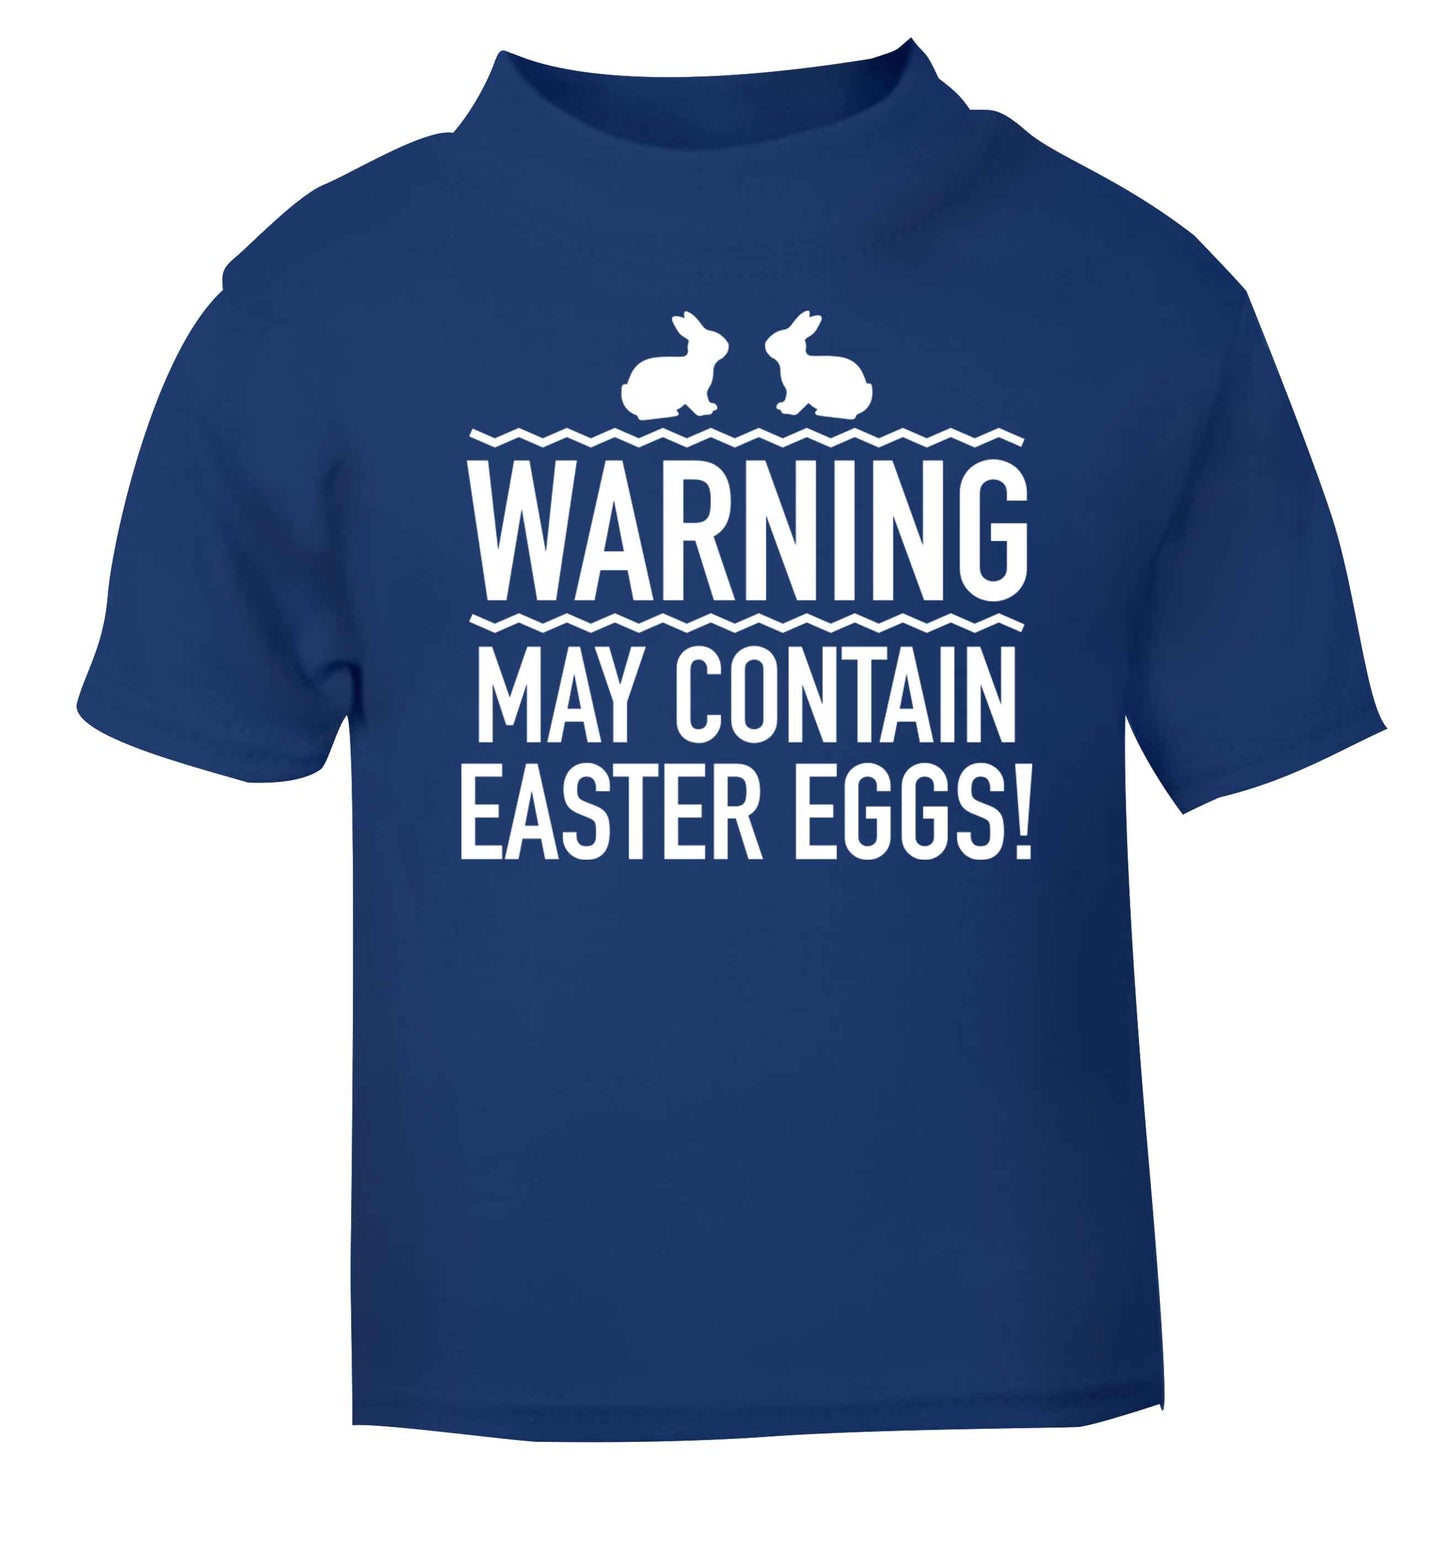 Warning may contain Easter eggs blue baby toddler Tshirt 2 Years